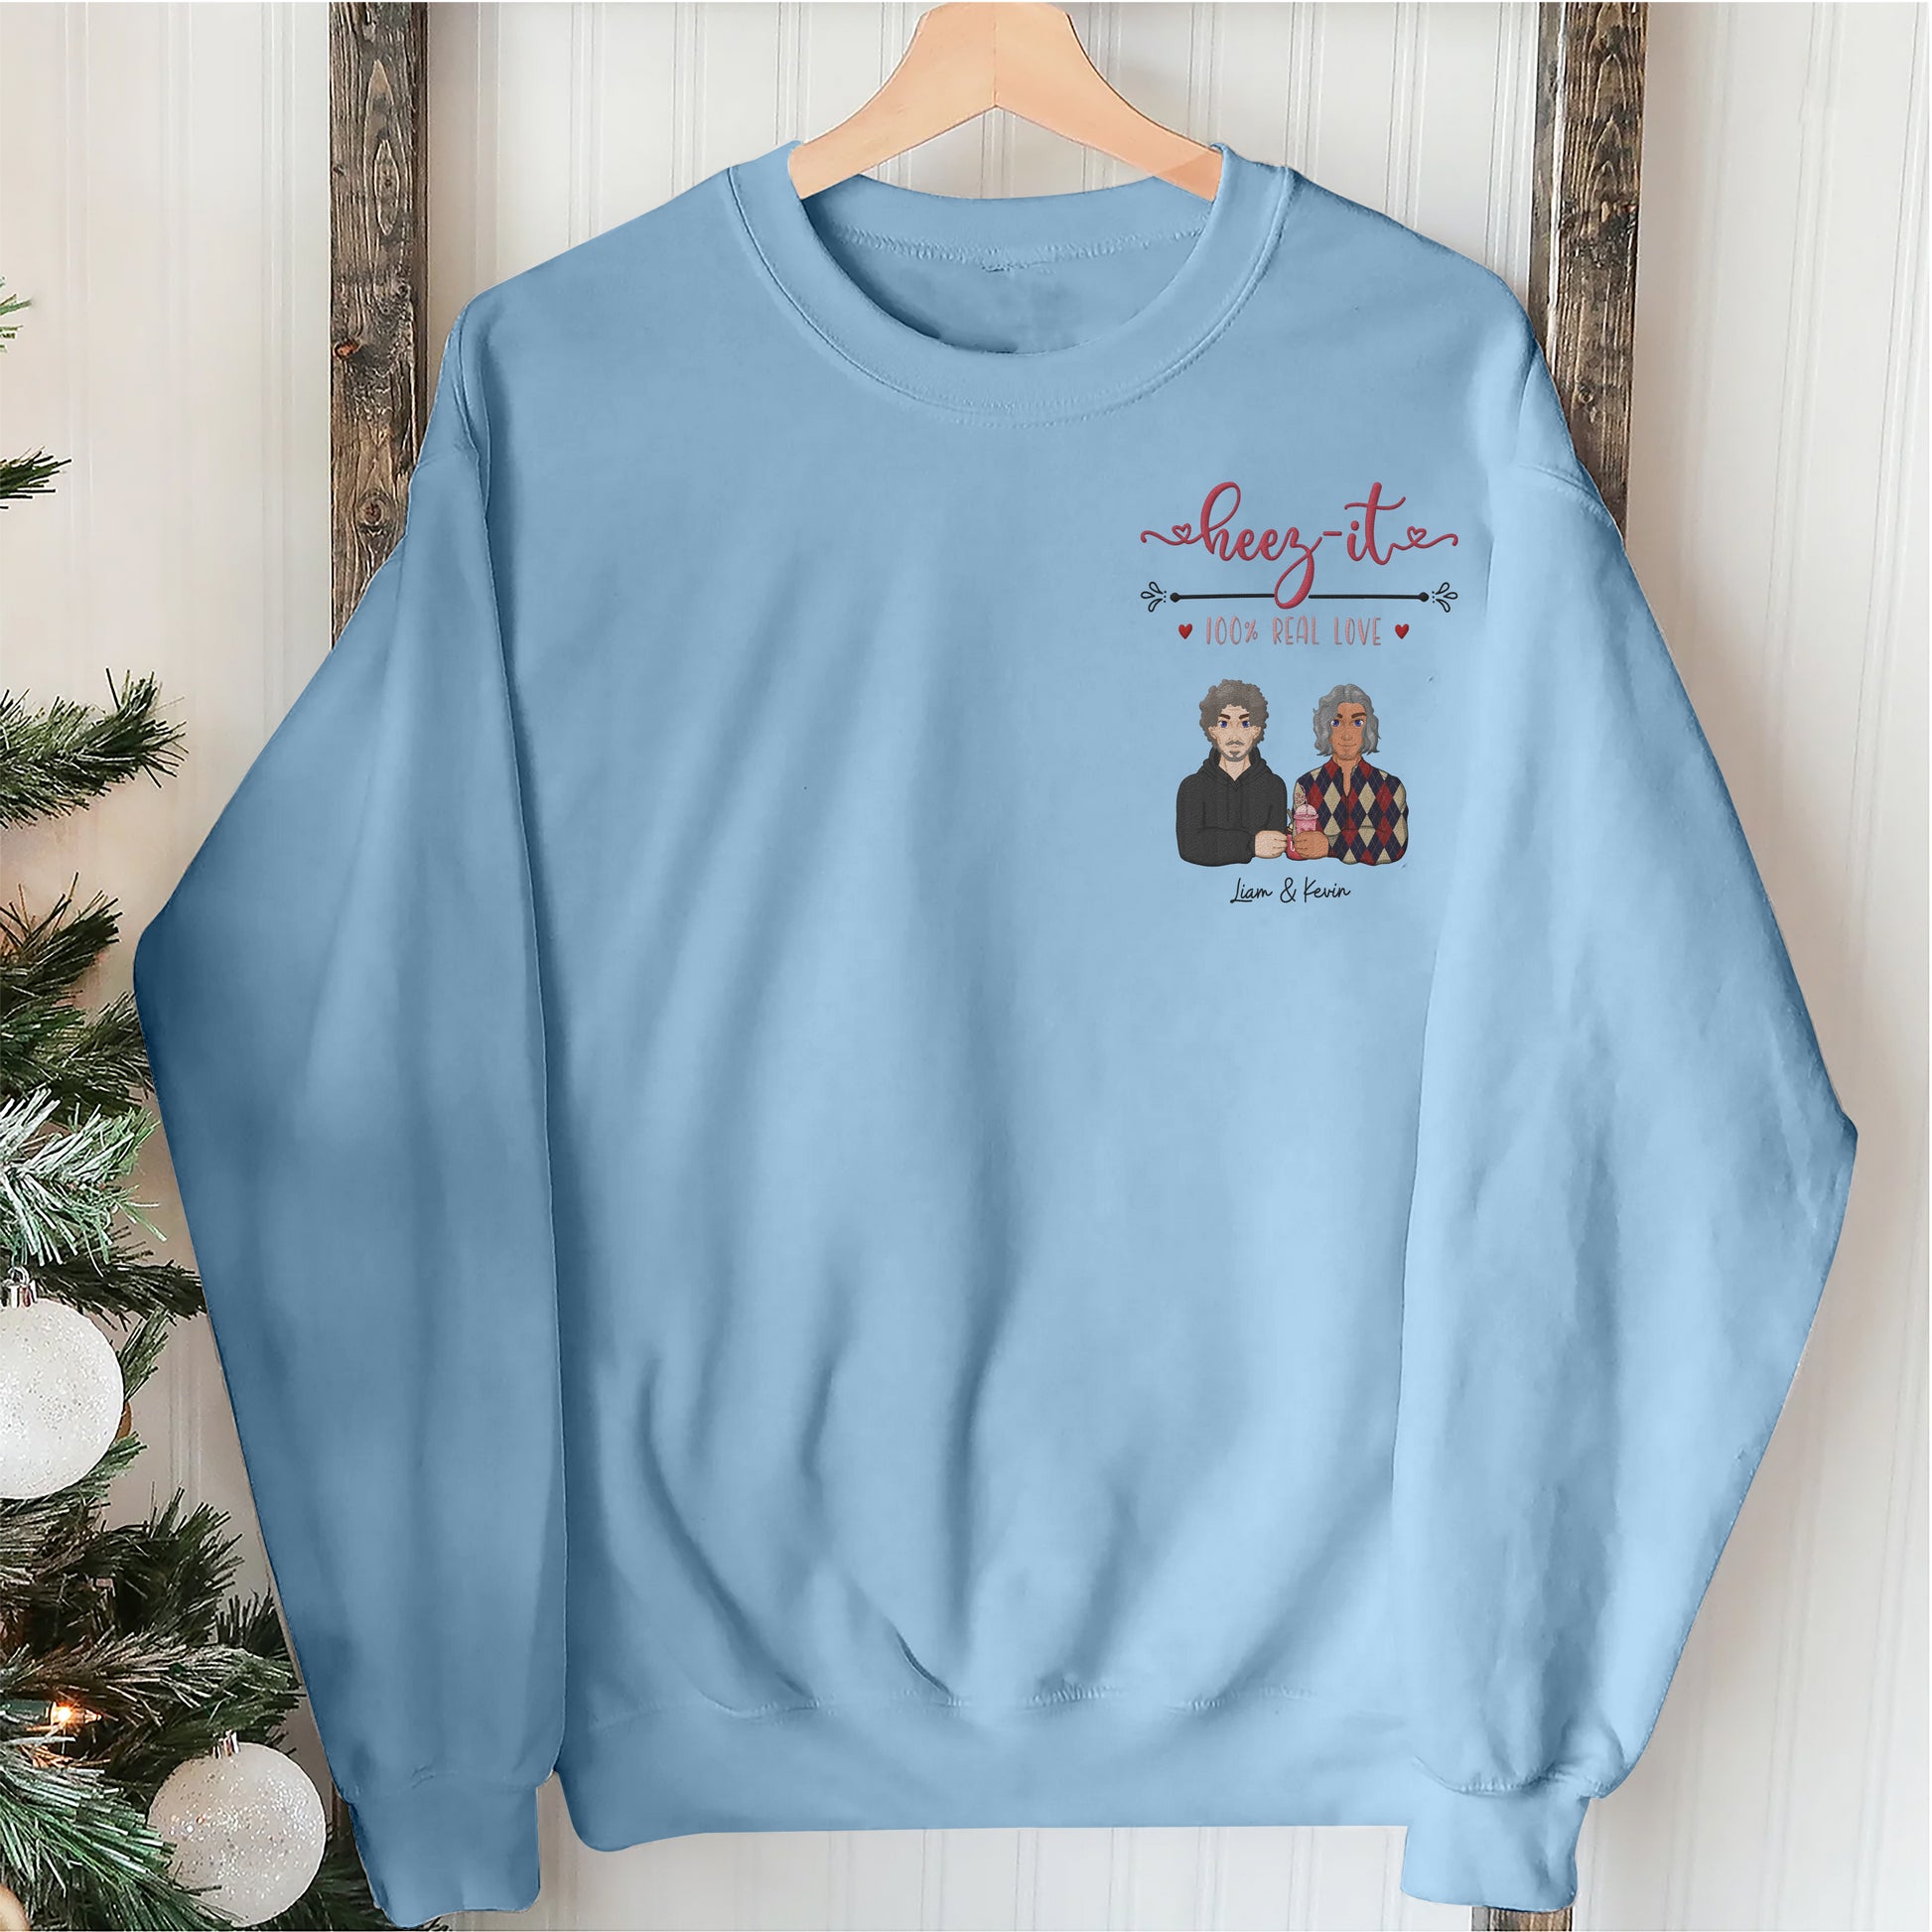 Sheez-it Heez-it - Personalized Embroidered Shirt For Couples - Valentine's Day Gift